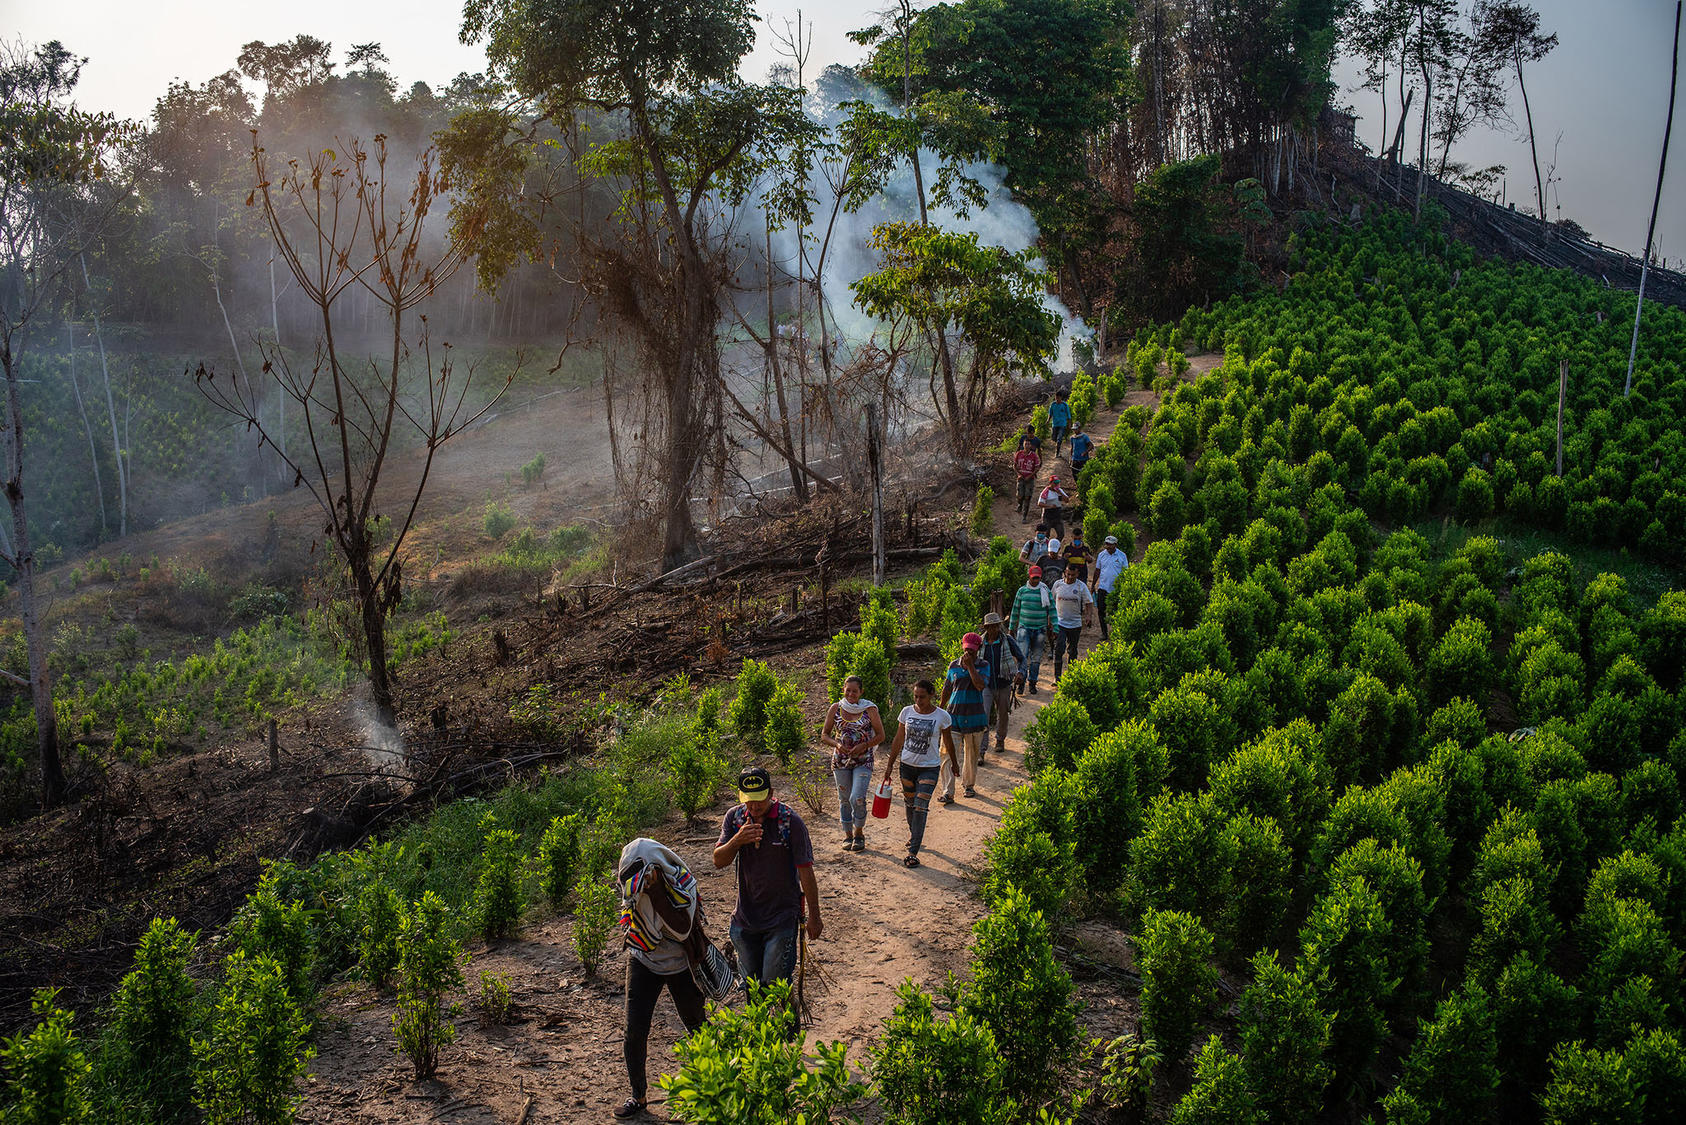 Colombians work a hillside coca plantation last year in Cucuta, in one of many regions controlled by armed insurgent or criminal groups five years after the government’s peace accord with the FARC rebel force. (Federico Rios/The New York Times)